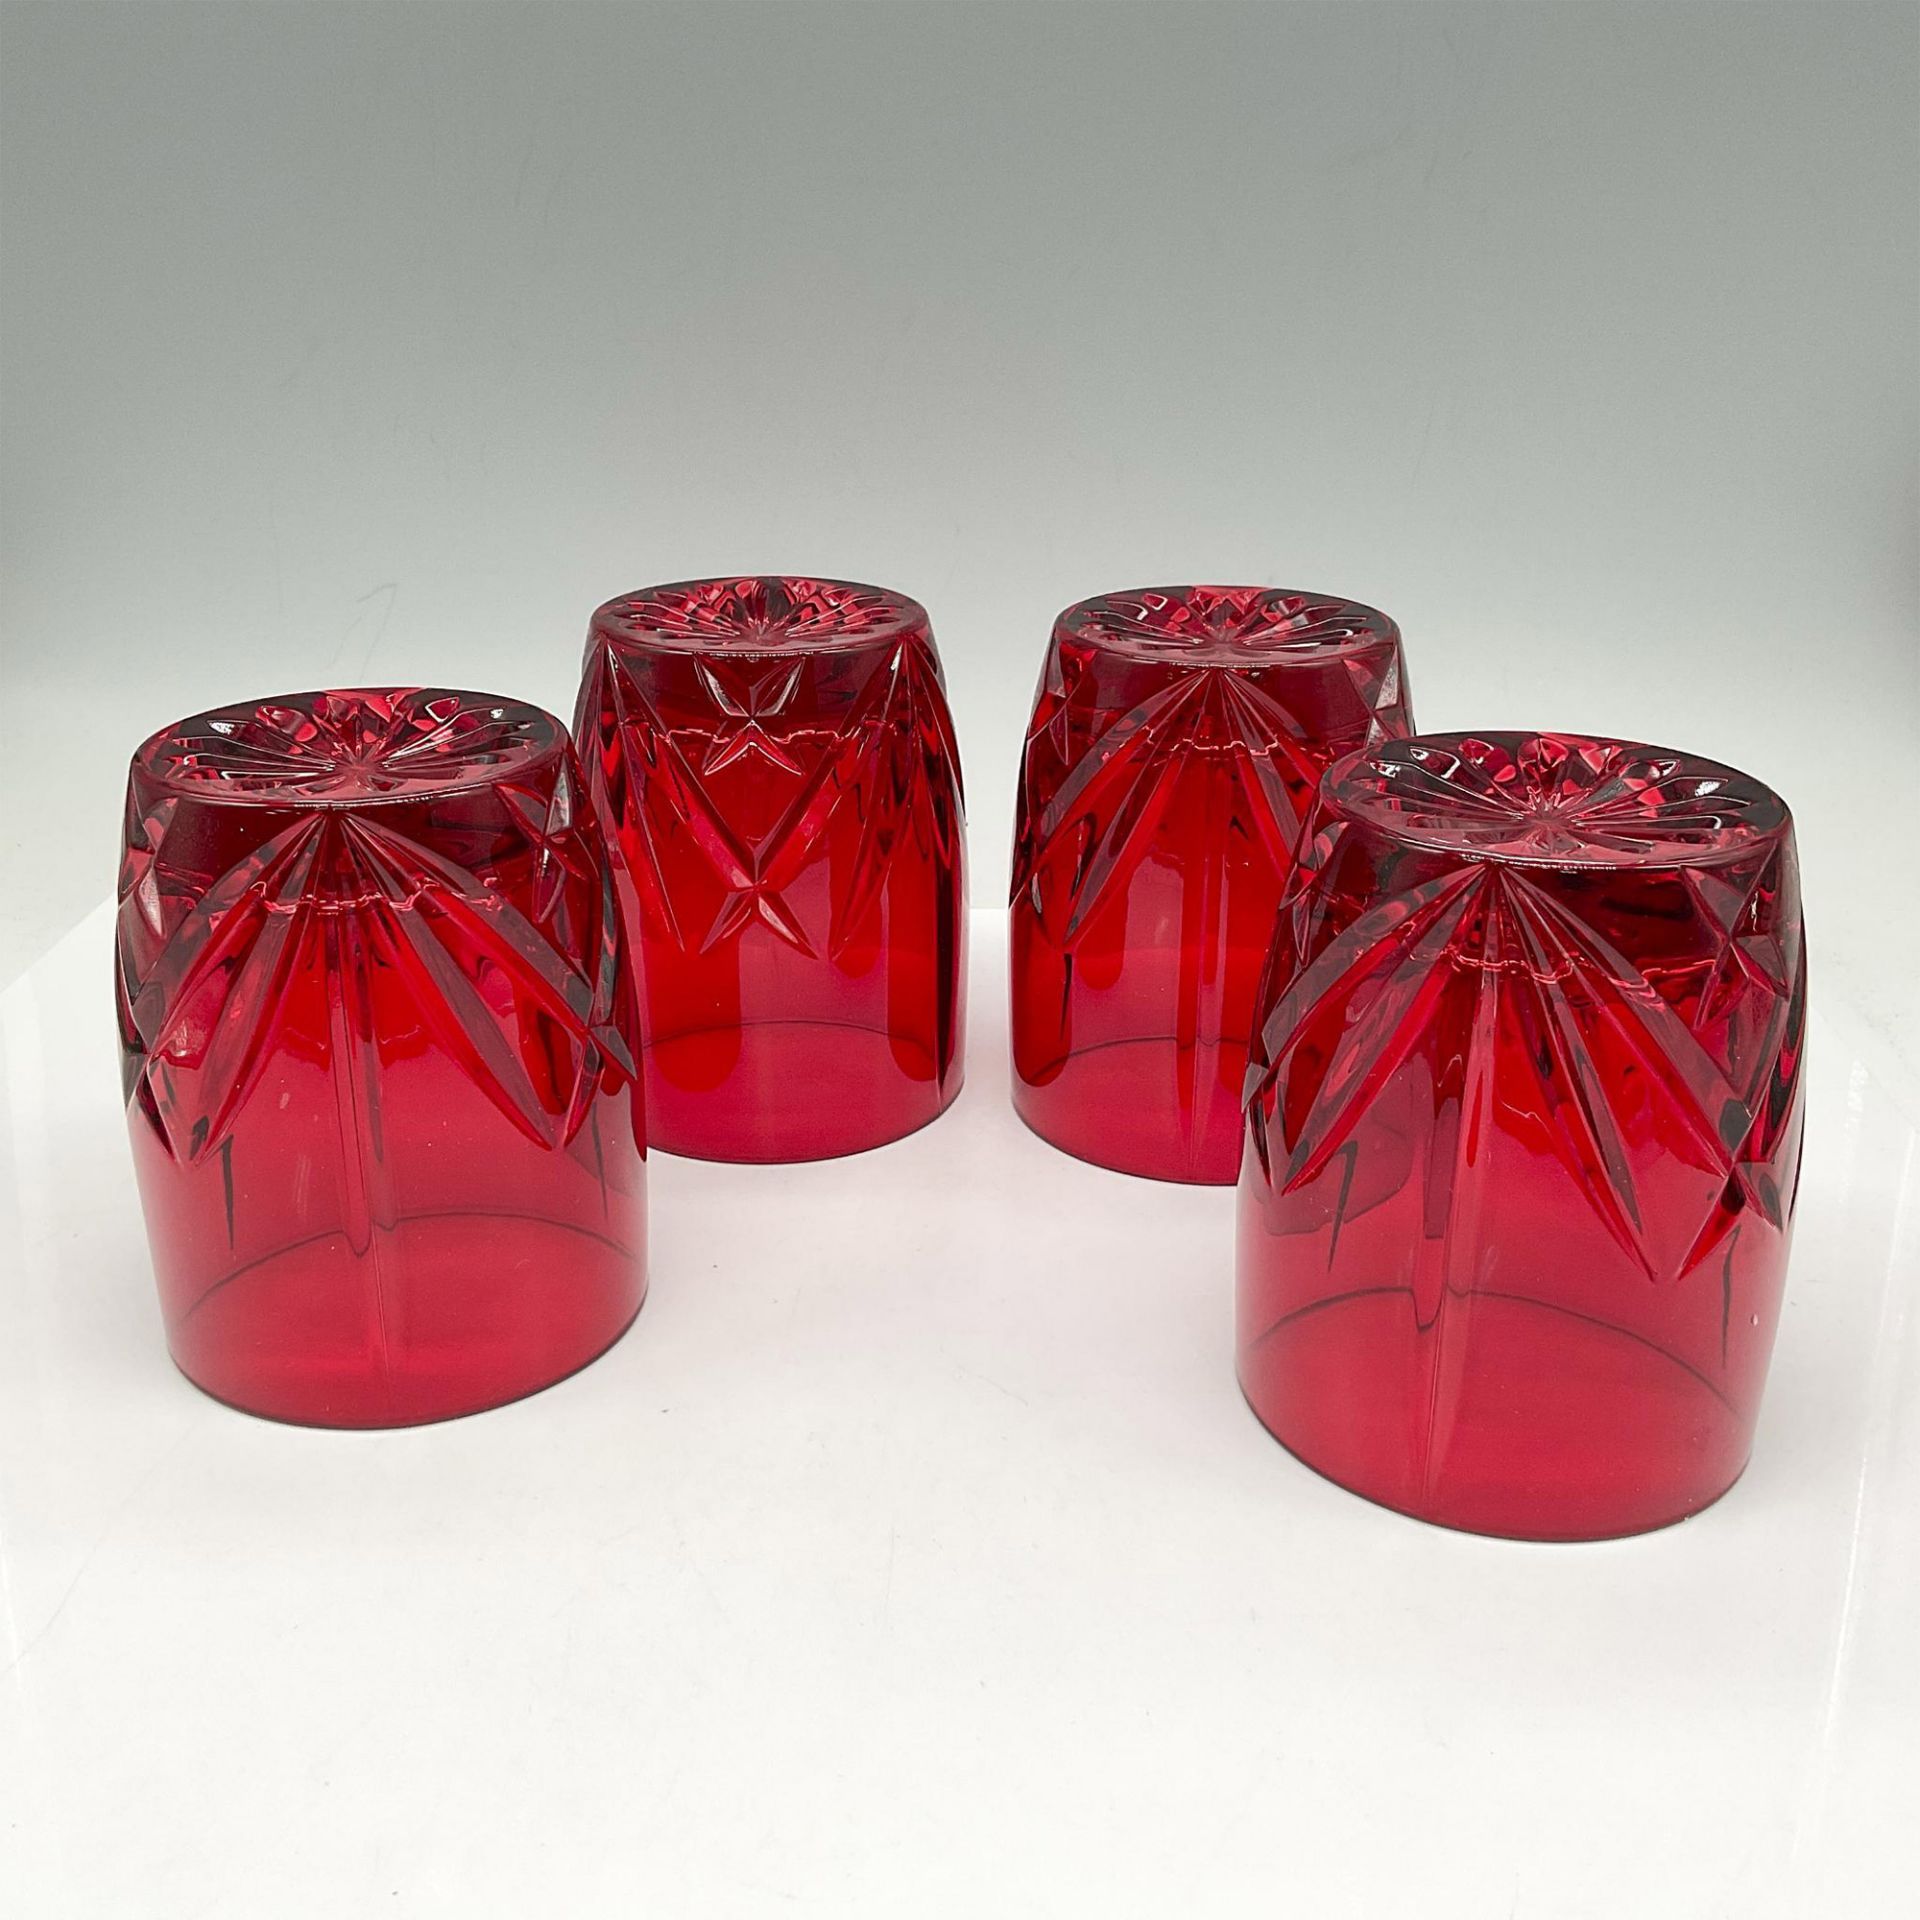 Marquis Waterford Brookside Red Old Fashion Glasses, 4 Set - Bild 3 aus 4